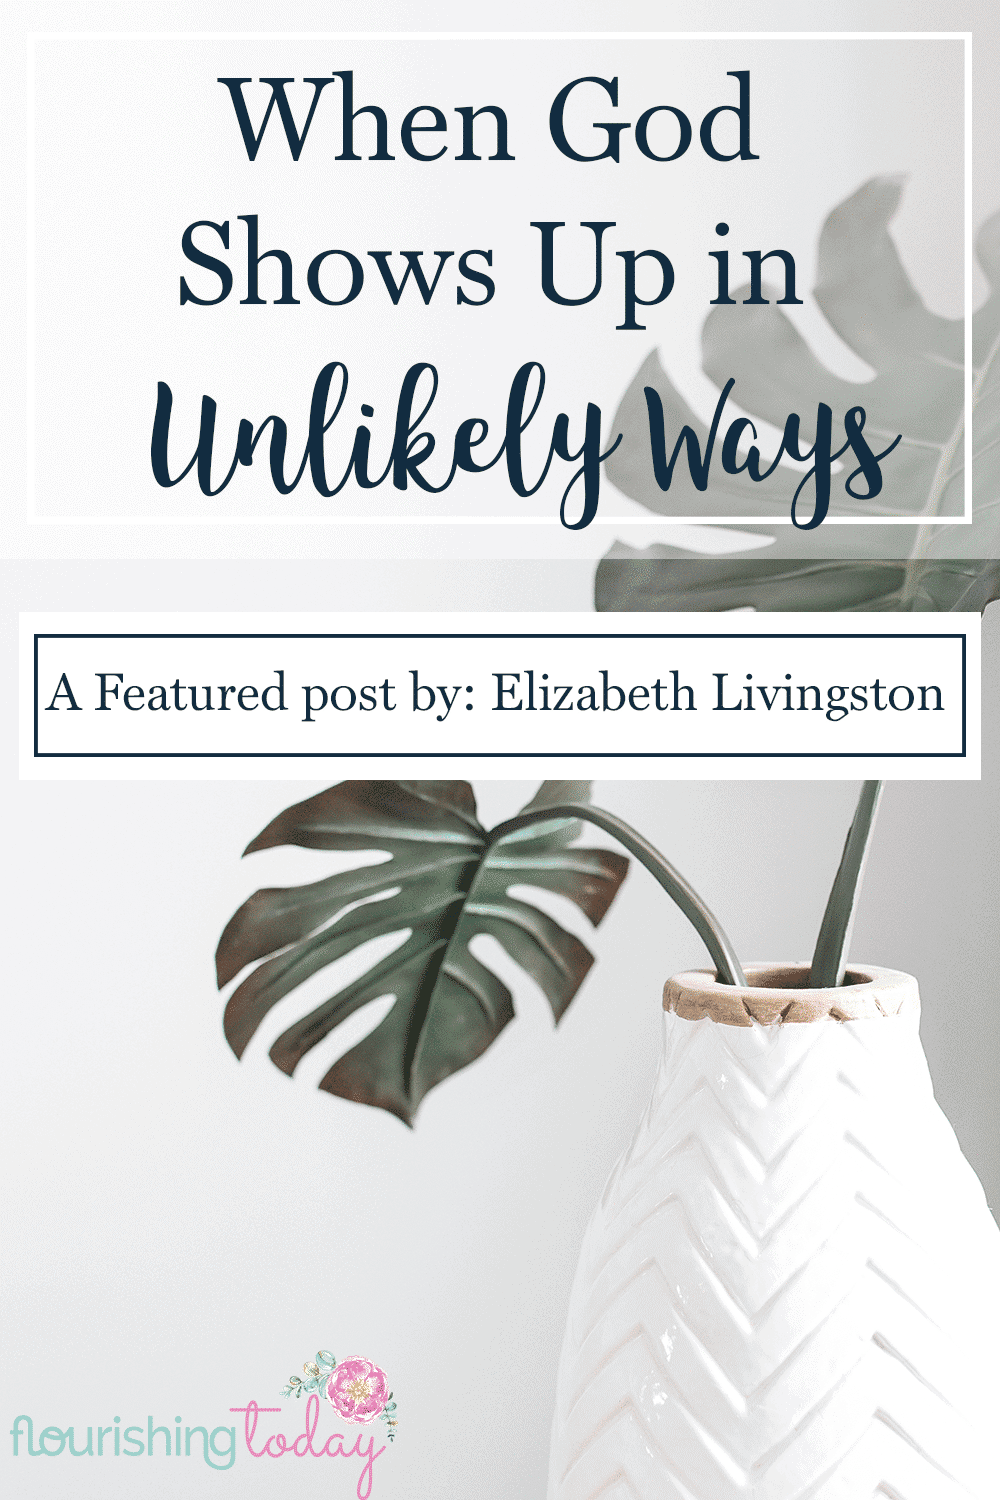 Have you ever noticed that God shows up in the most unlikely ways? Today we share how God shows up through people we least expect and in unlikely ways.